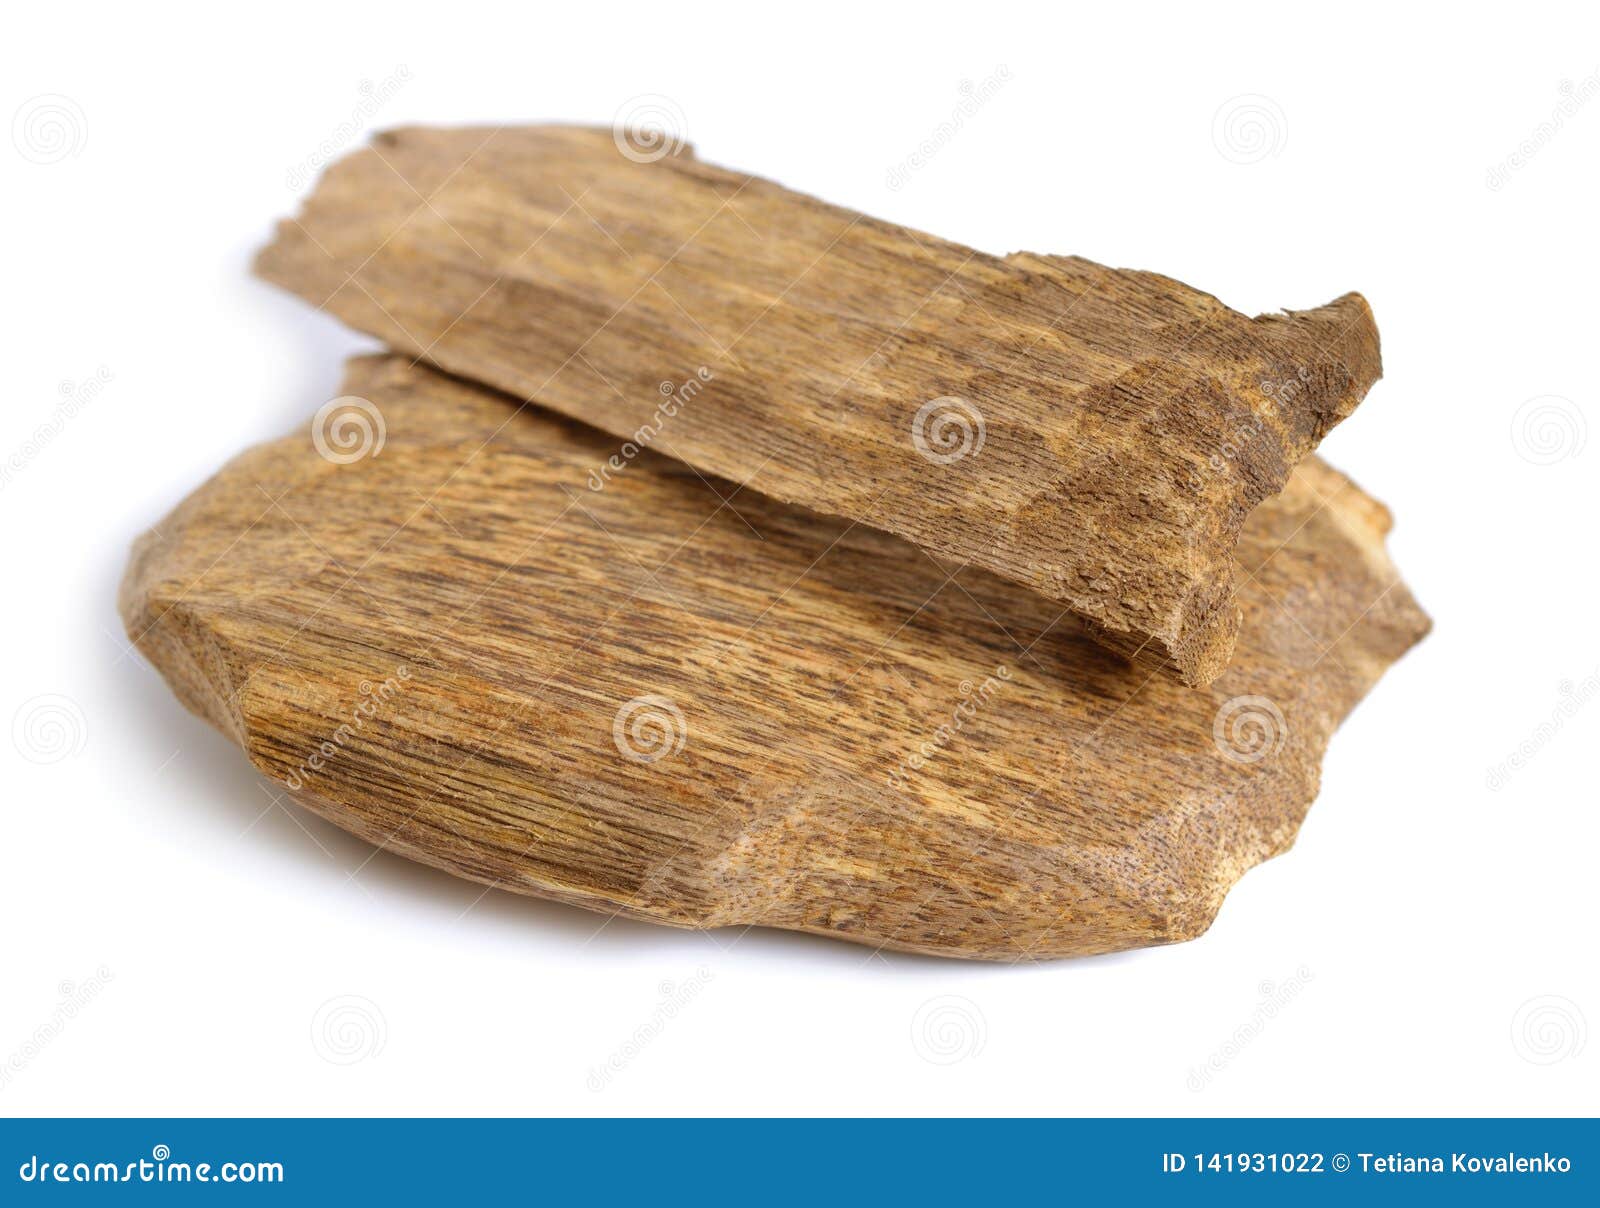 agarwood, also called aloeswood oudh,  on white background